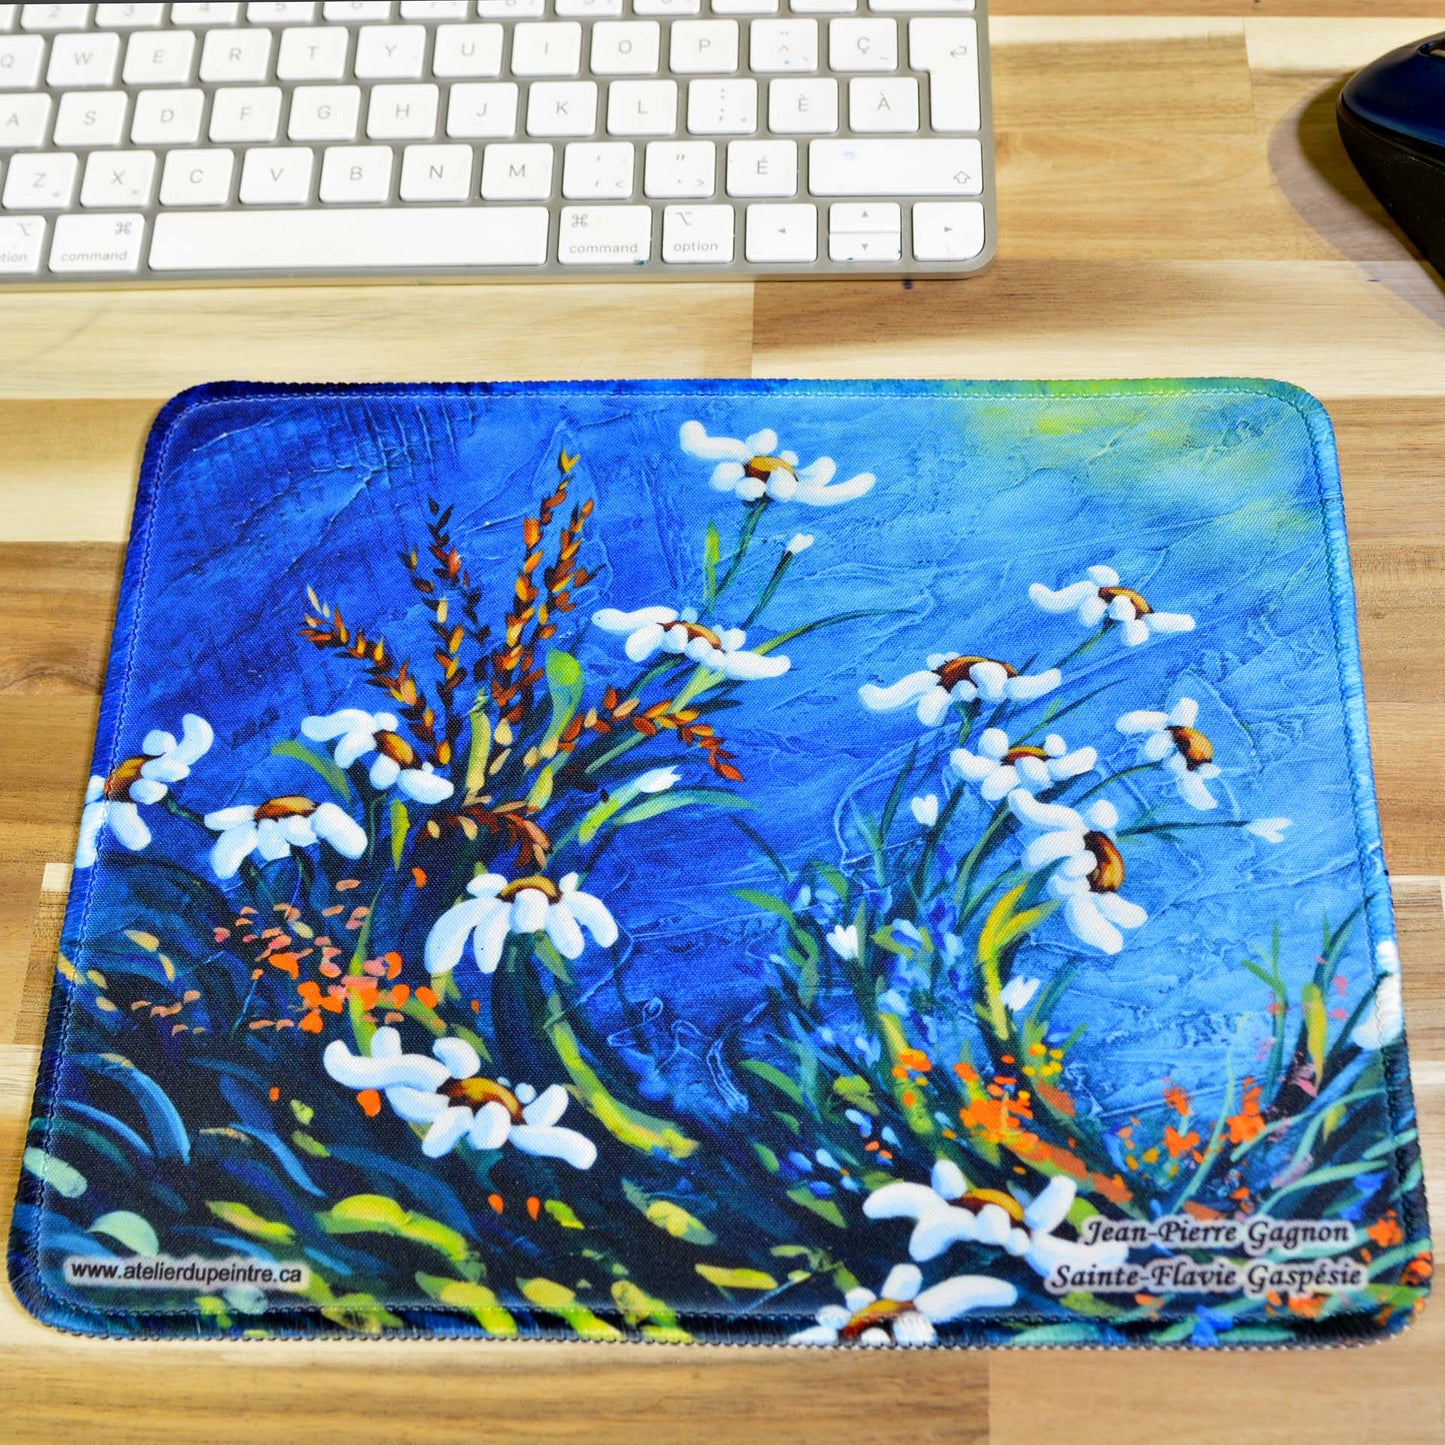 Mouse pad with various art prints